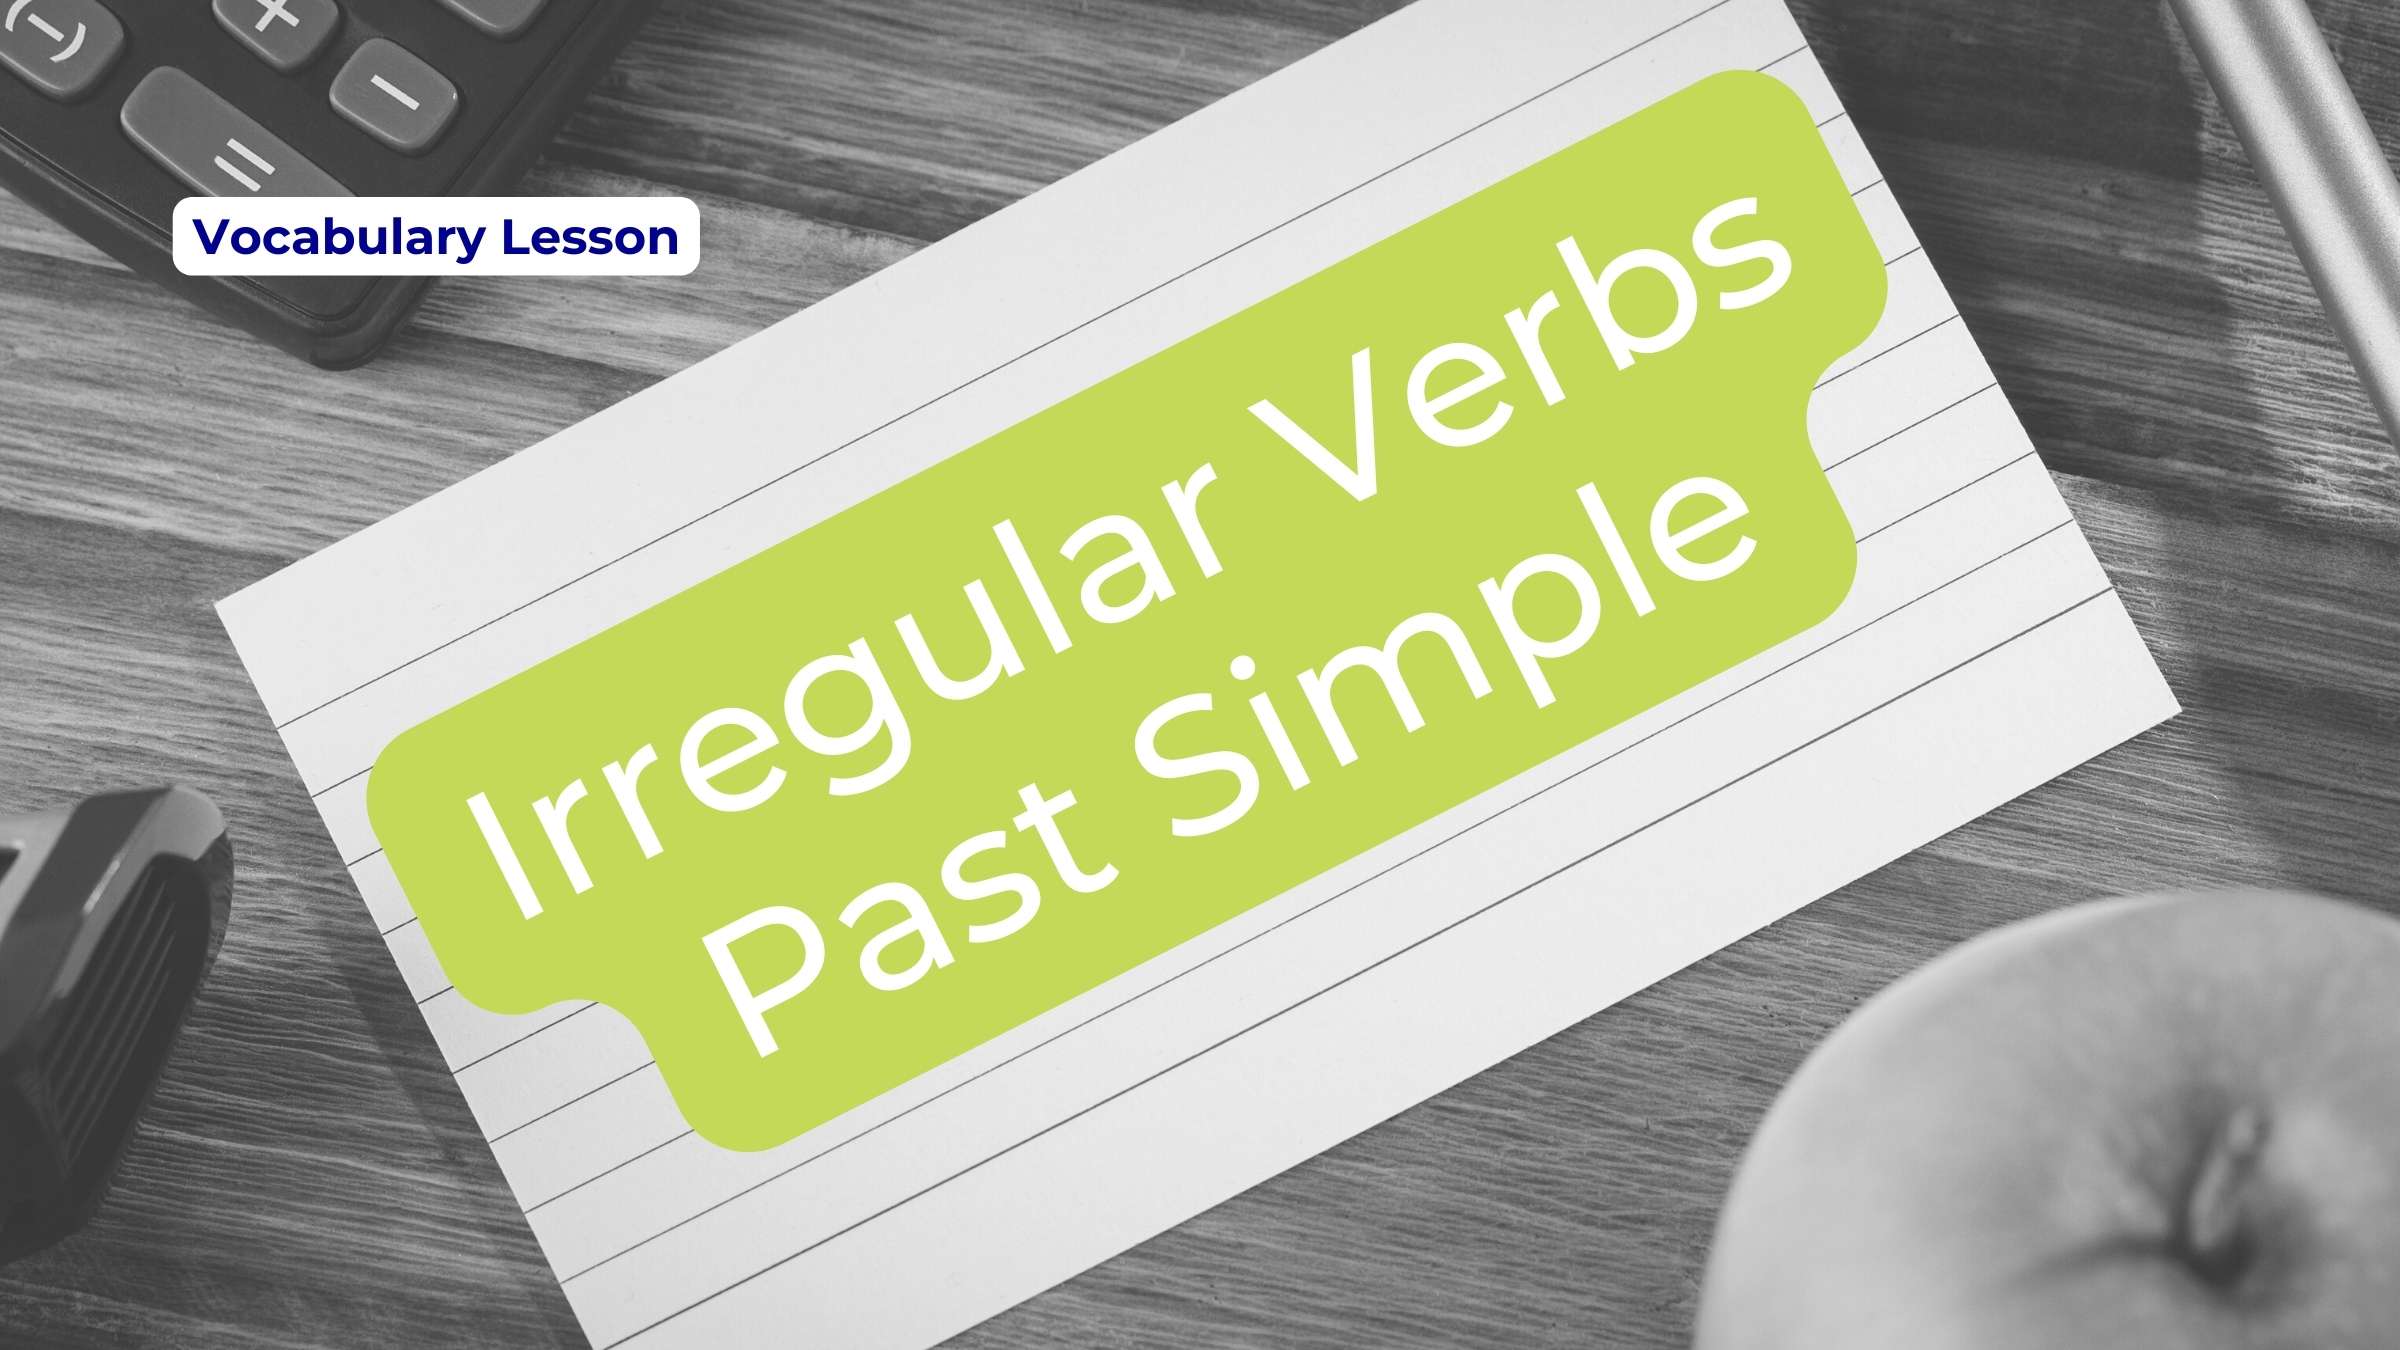 irregular past simple verbs in English vocabulary cover